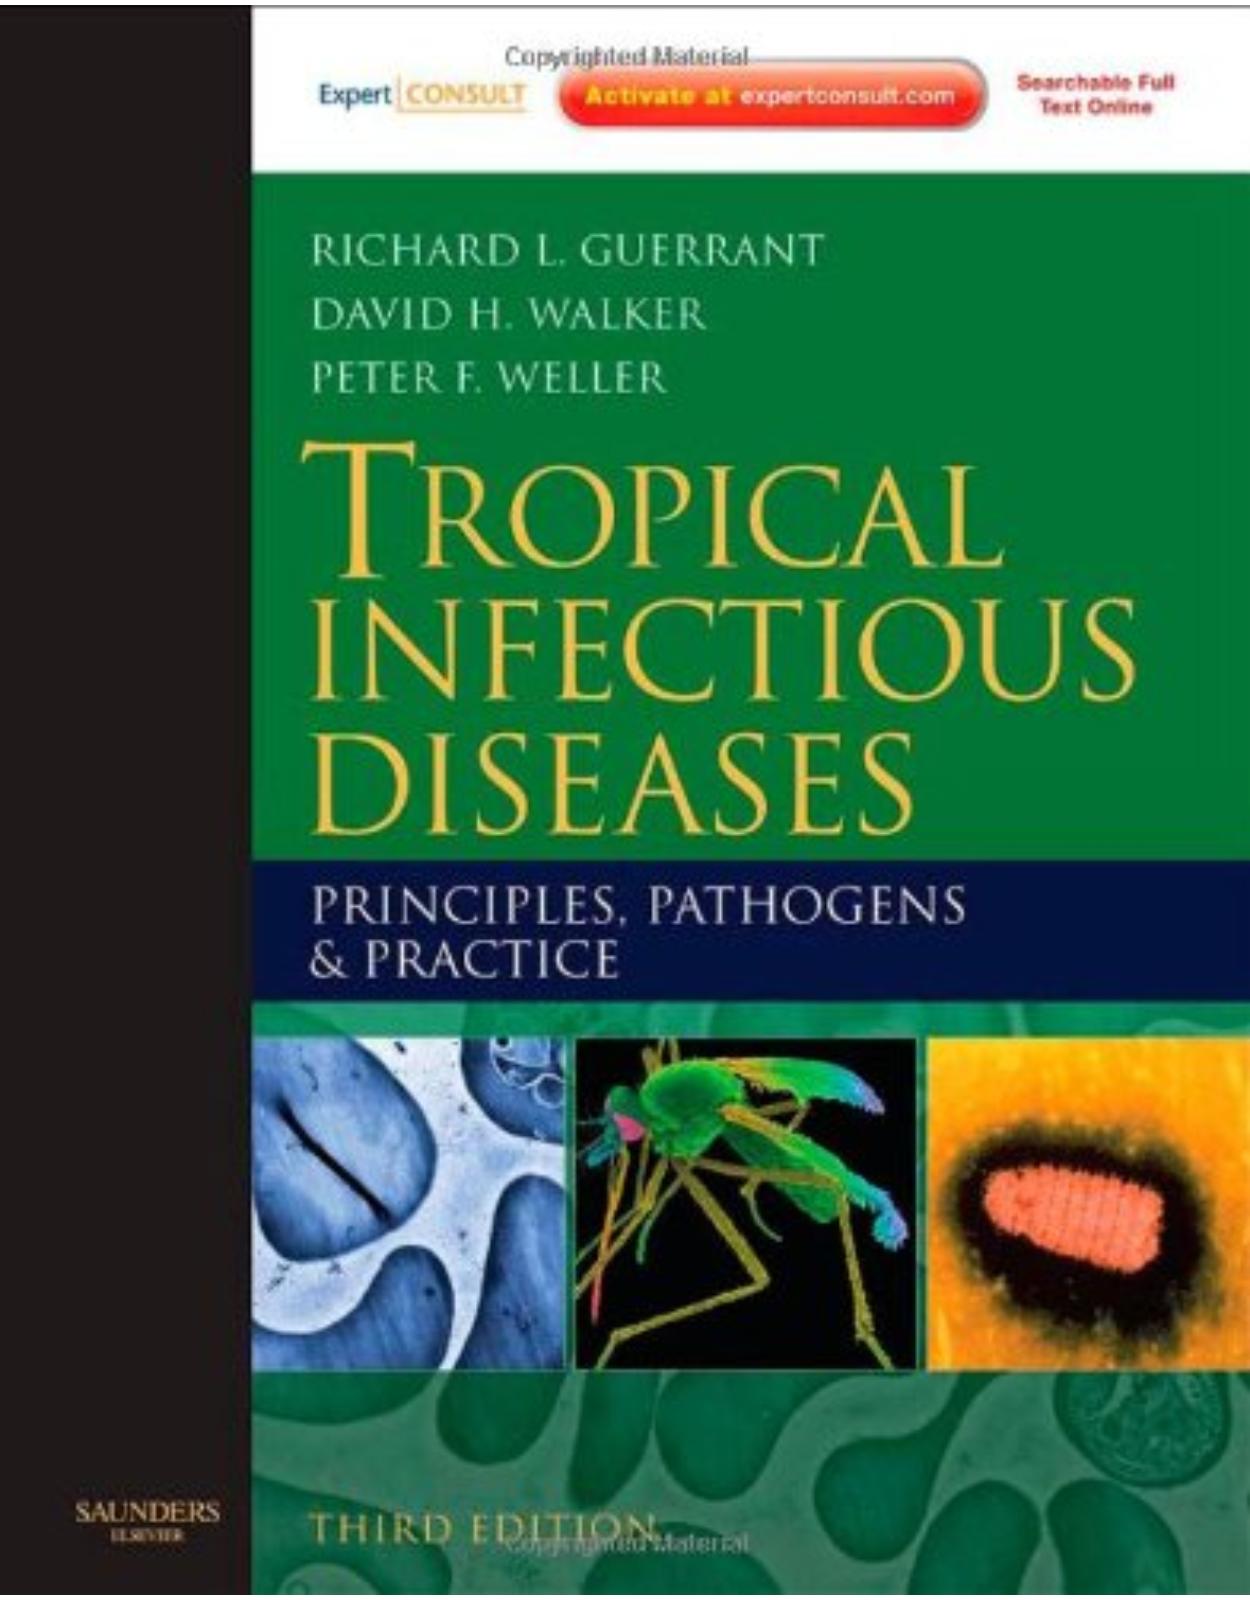 Tropical Infectious Diseases: Principles, Pathogens and Practice: Expert Consult 3rd Revised edition